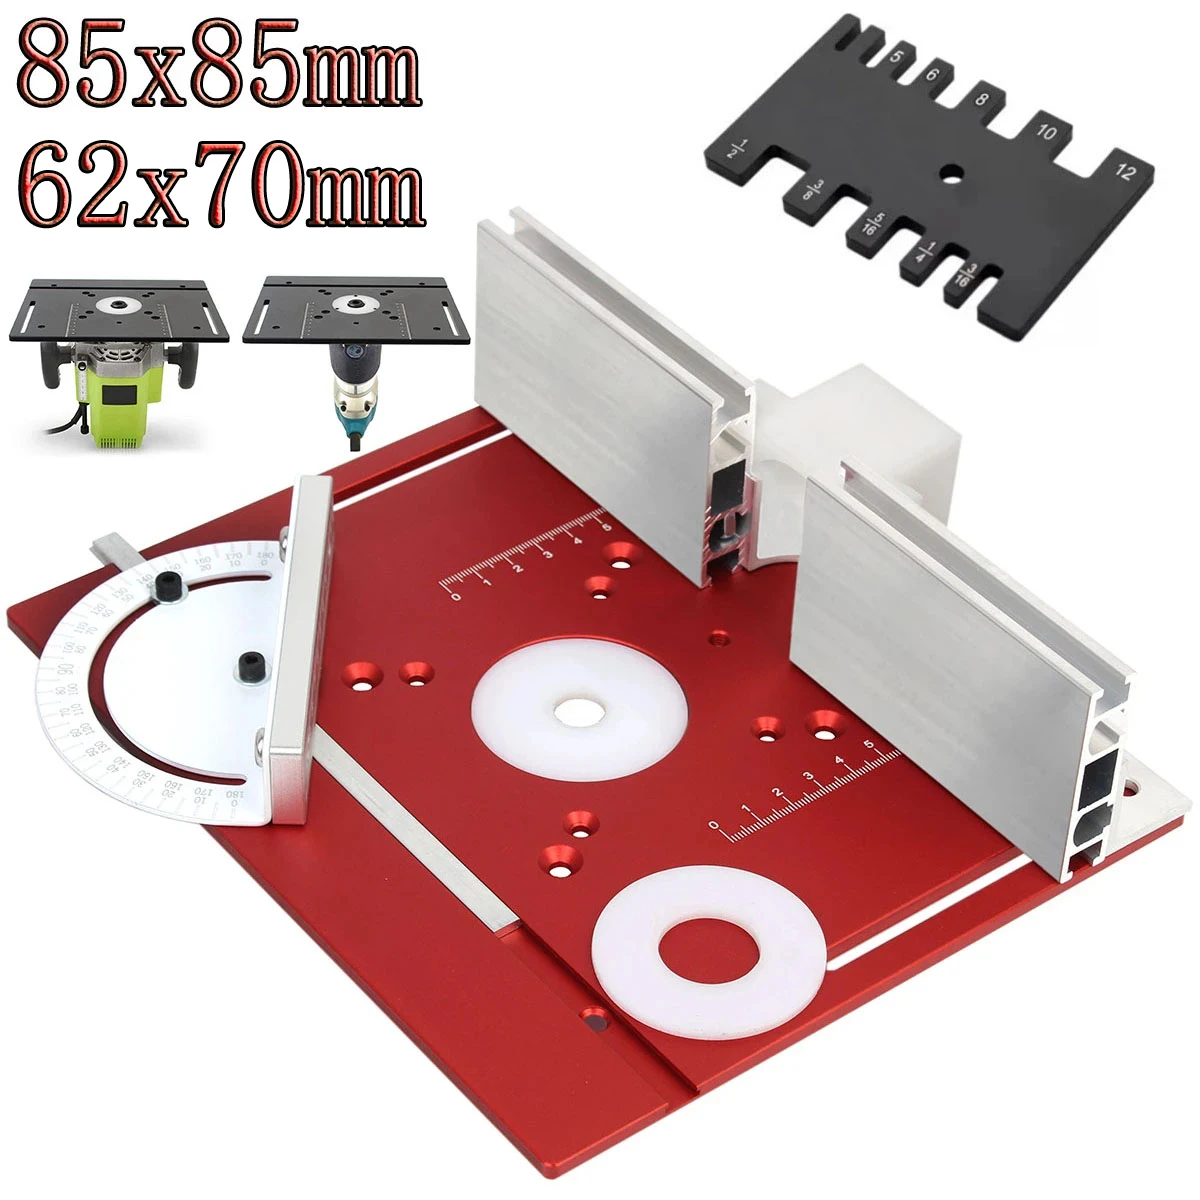 Aluminum Router Table Insert Plate W/ Miter Gauge 62x70mm 85x85mm for Woodworking Benches Table Saw Trimmer Engraving Machine